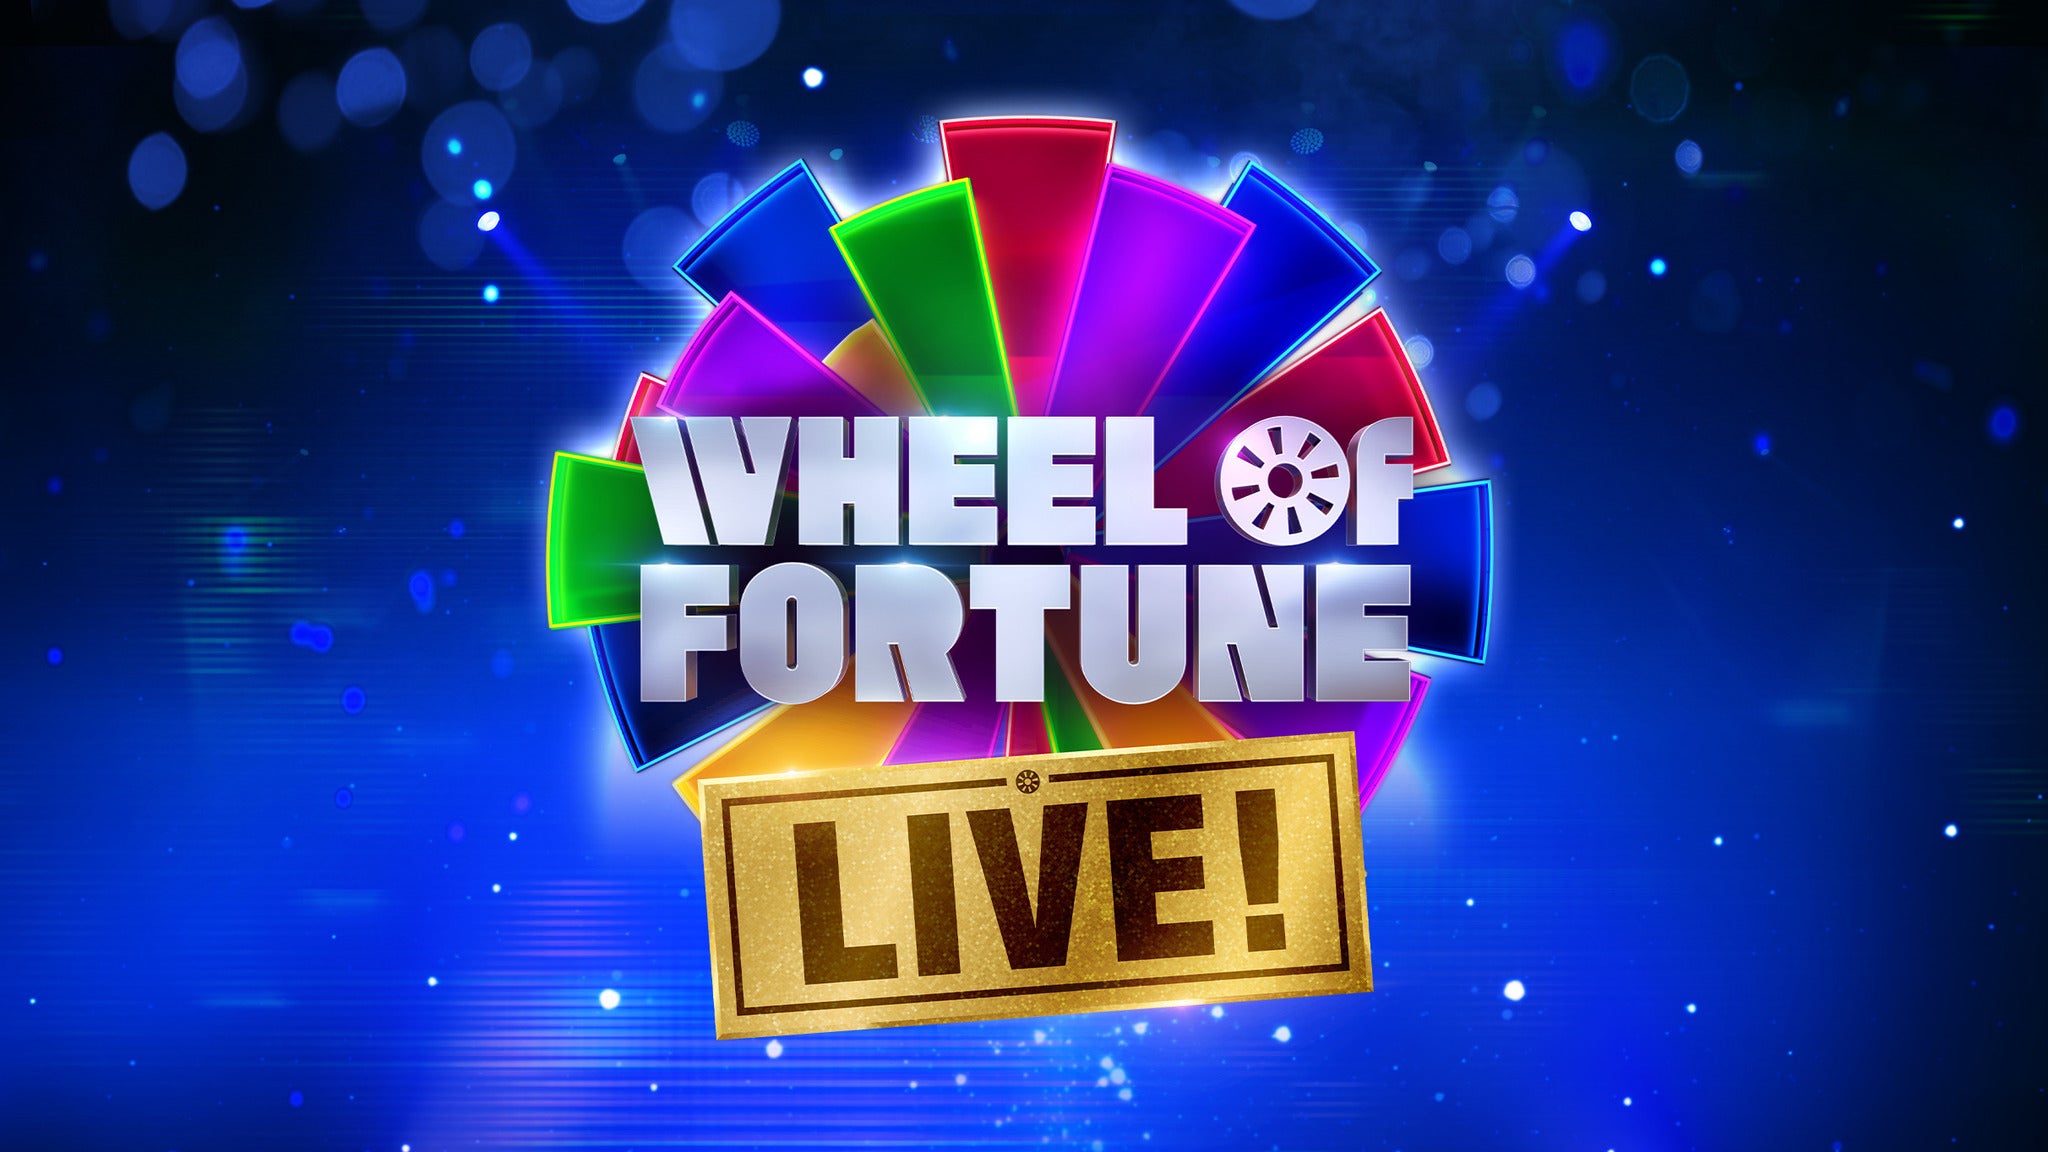 Wheel Of Fortune Live! presale code for advance tickets in Mashantucket